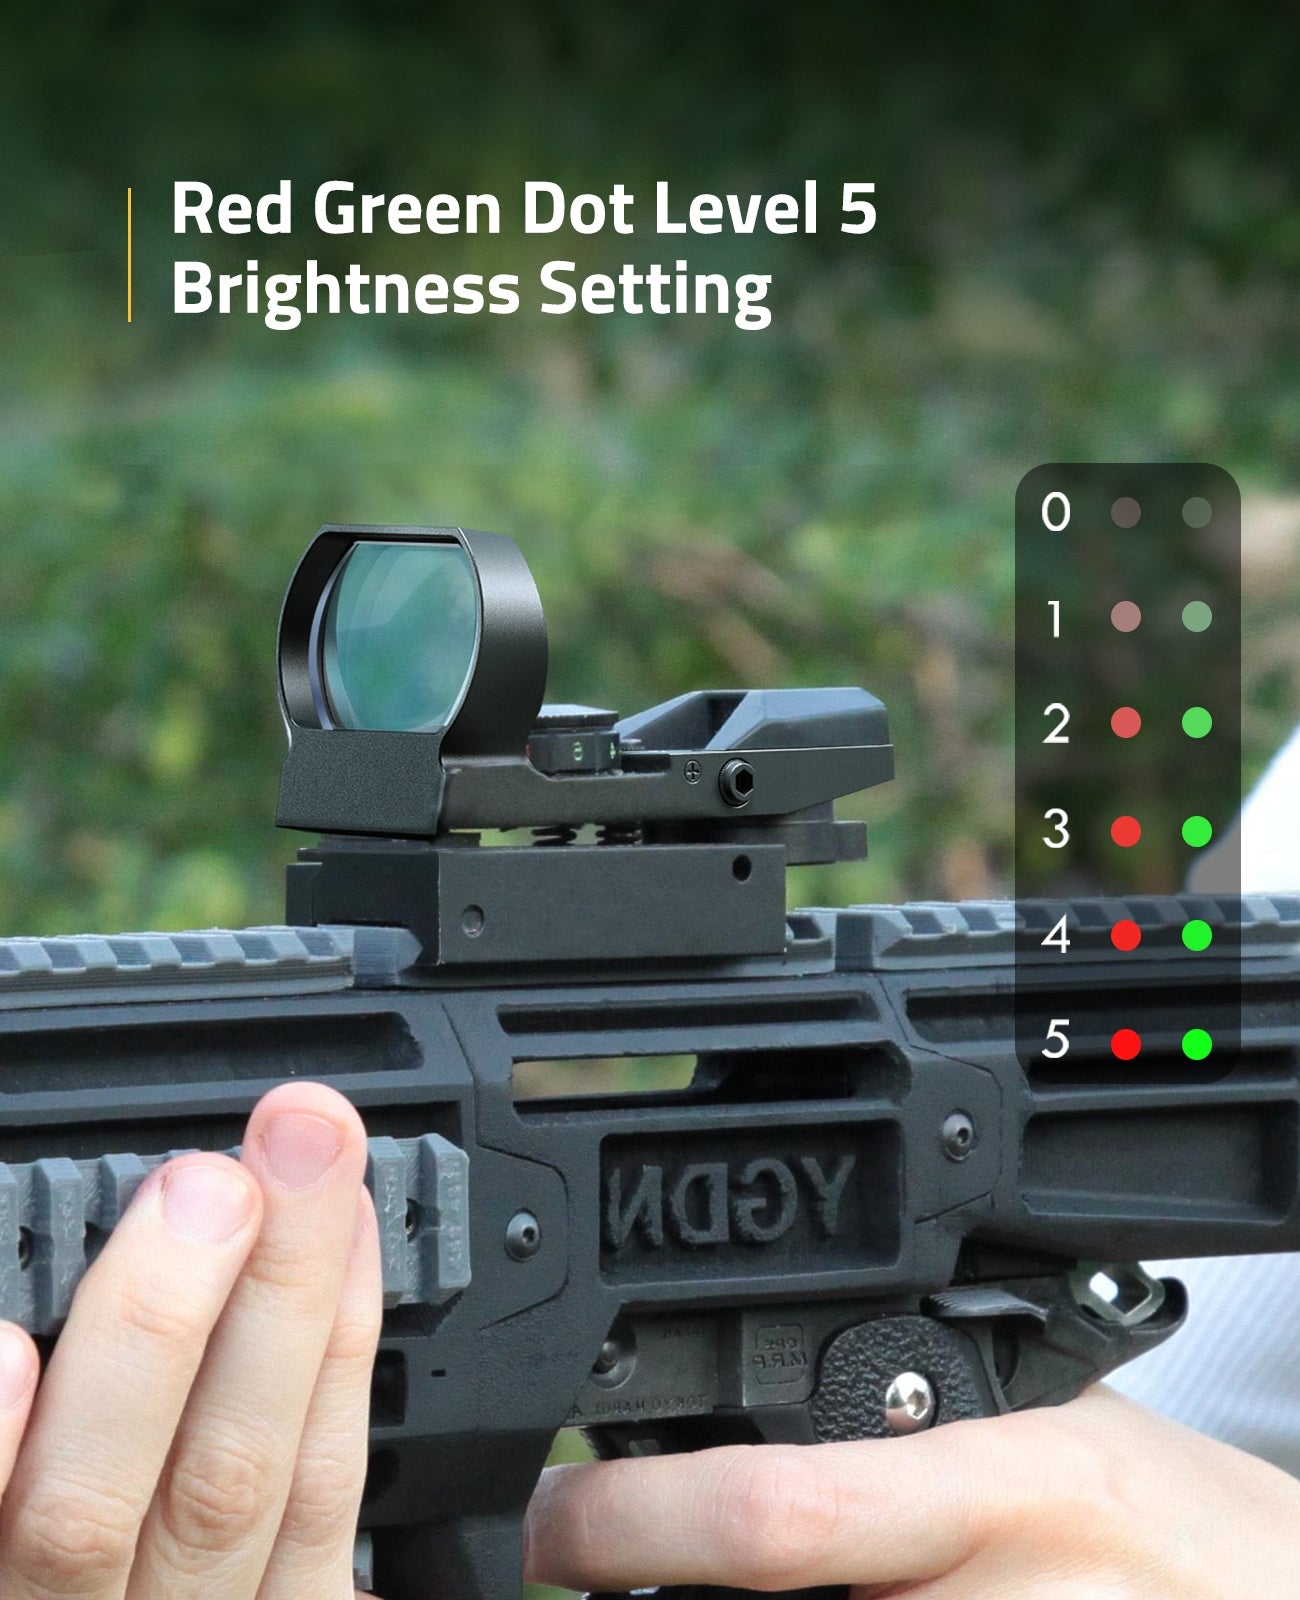 Red Green Dot Sight with 5 Levels Brightness Settings